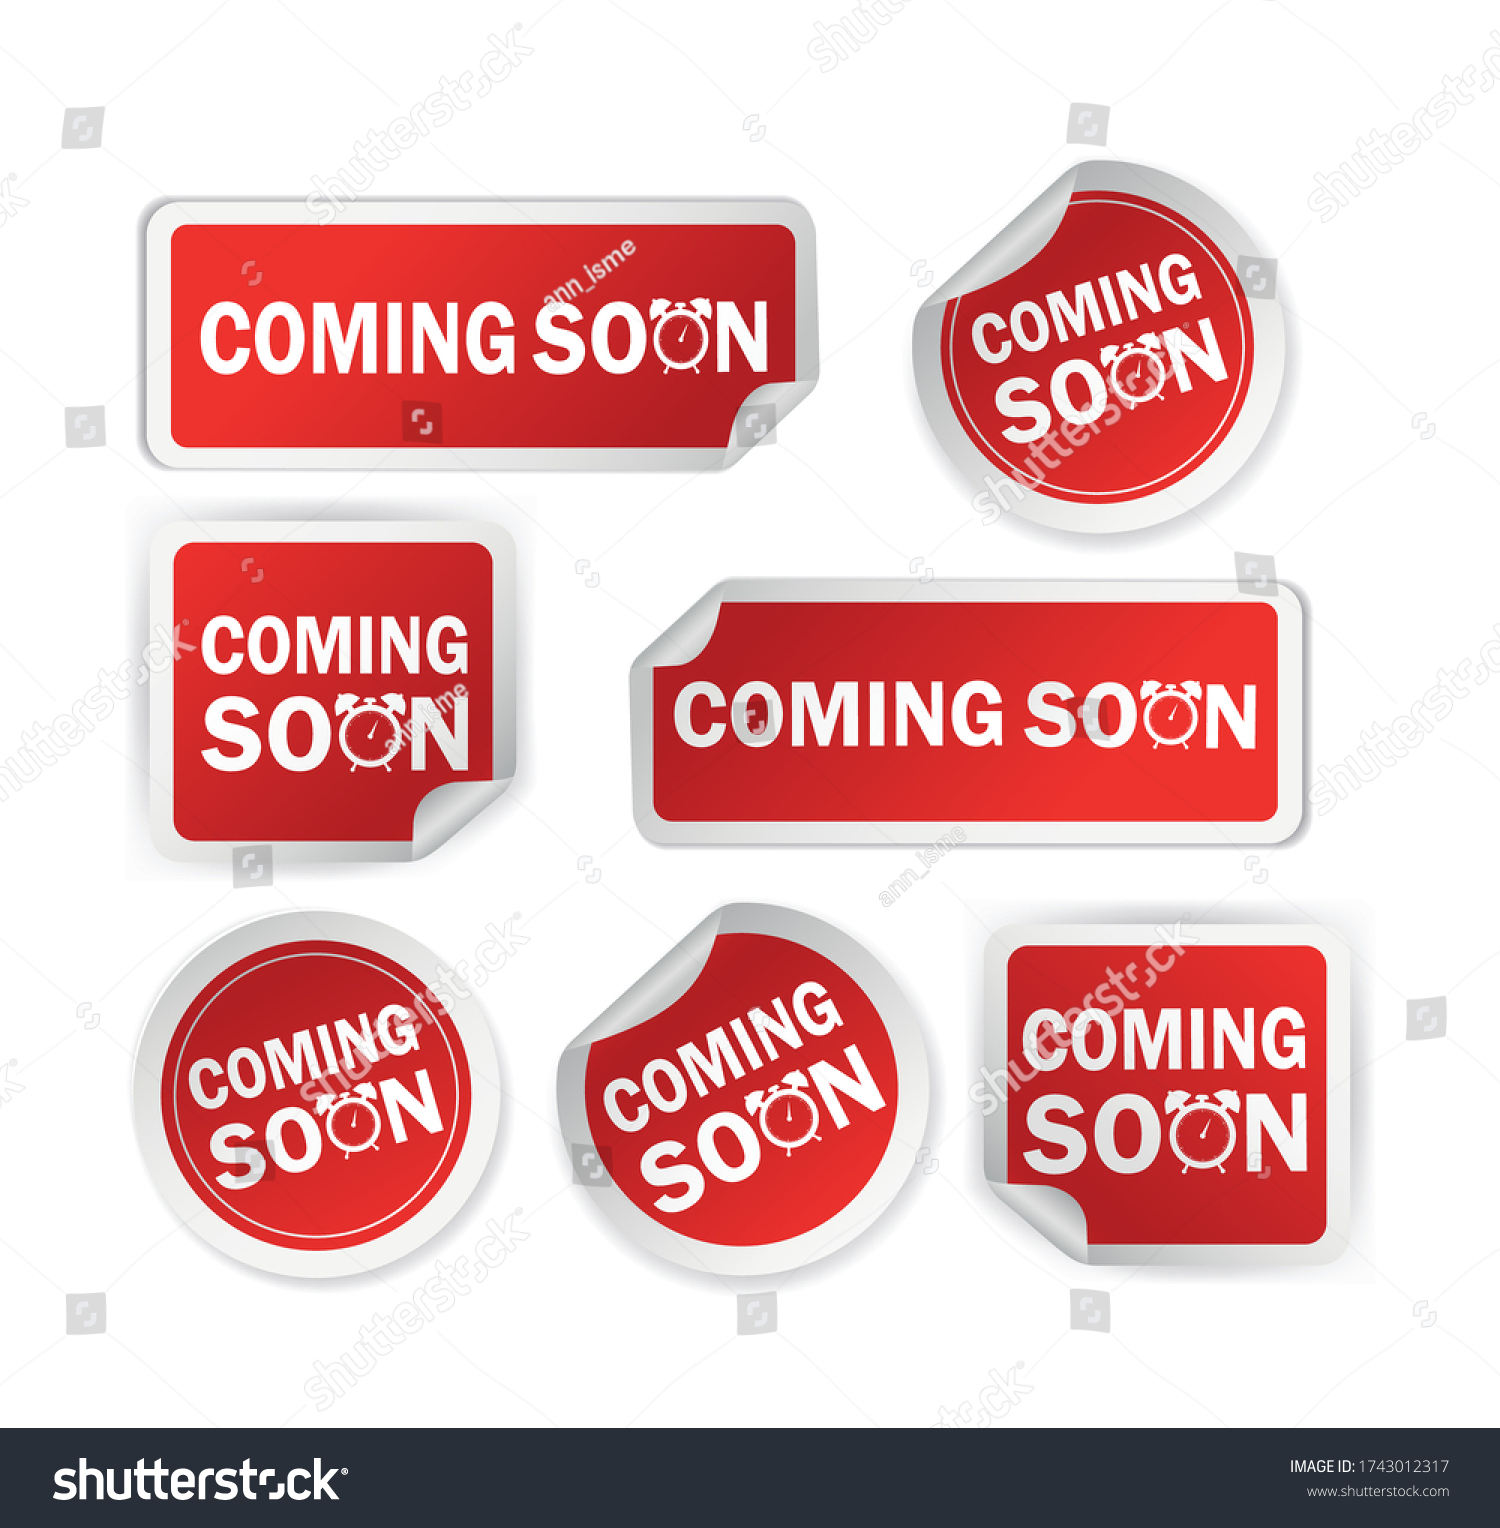 Red coming soon sticker on white background for promotion design. Vintage label. Round button. Vector icon. #1743012317